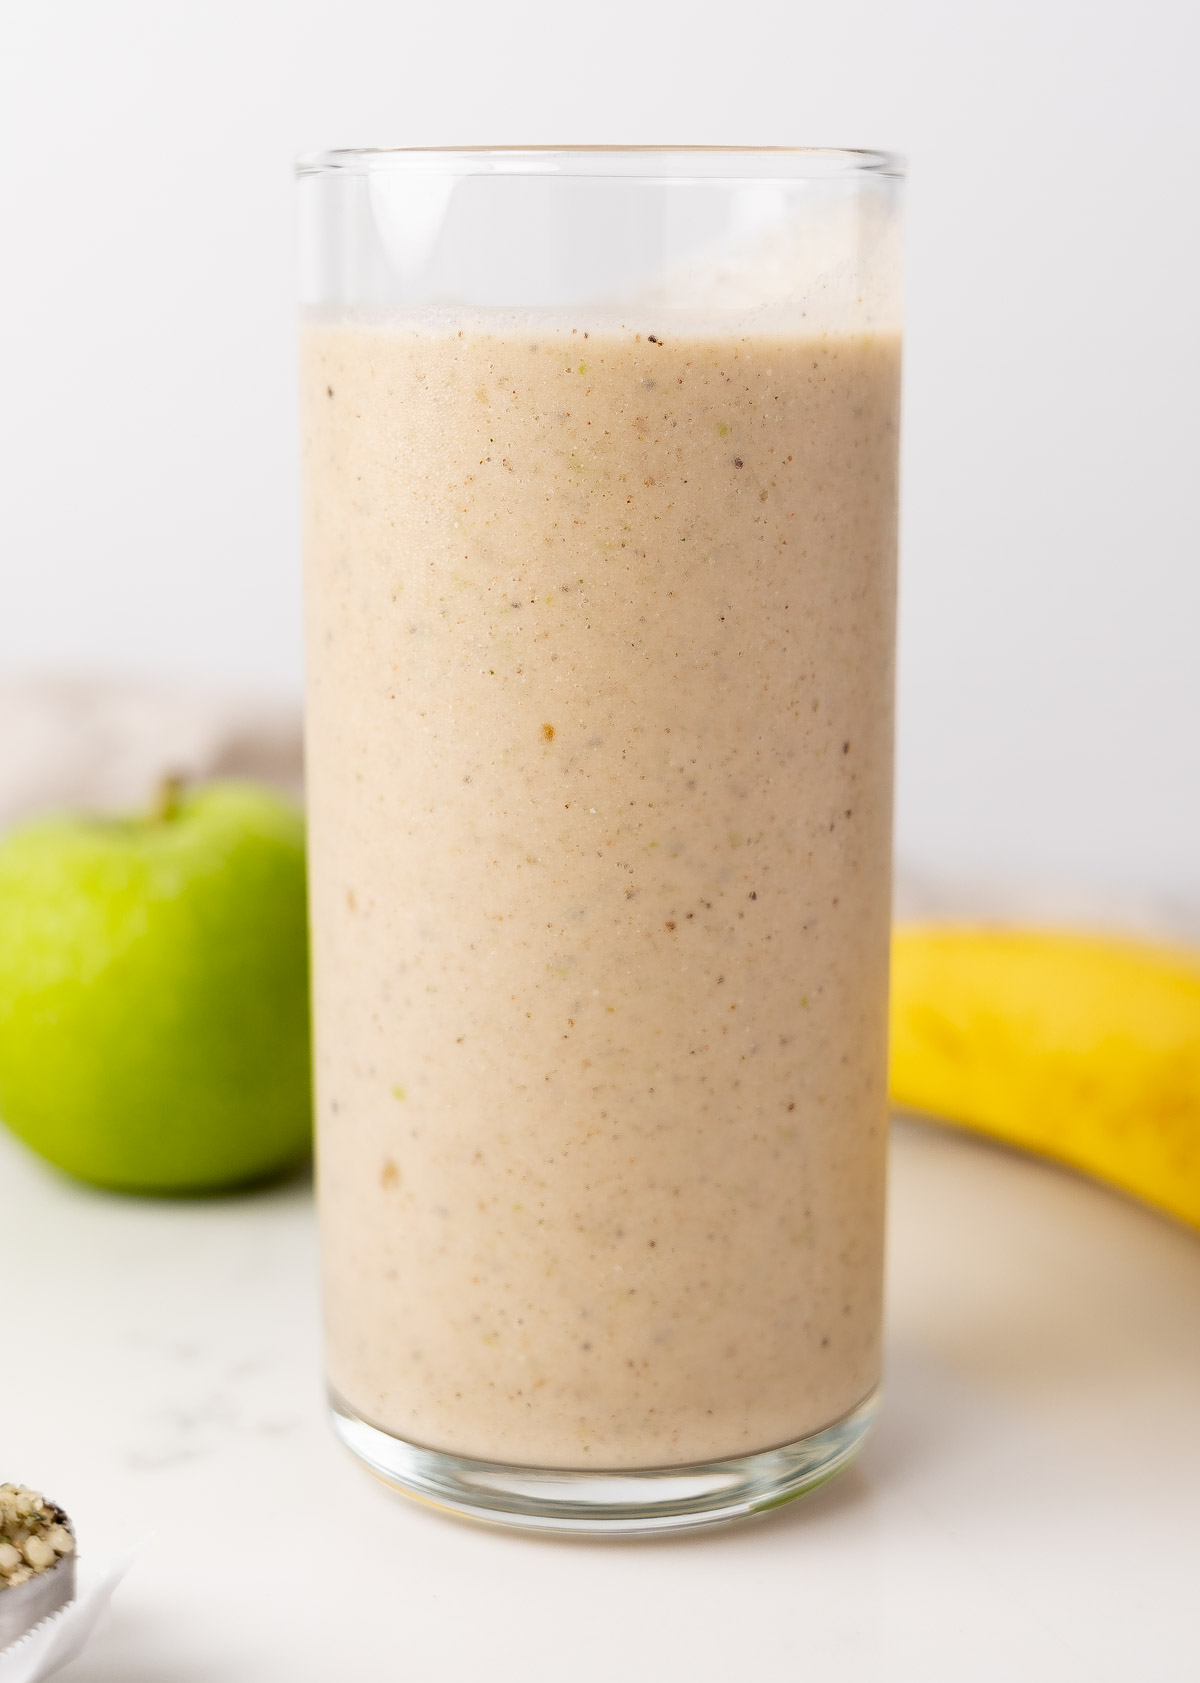 banana apple smoothie in a glass cup